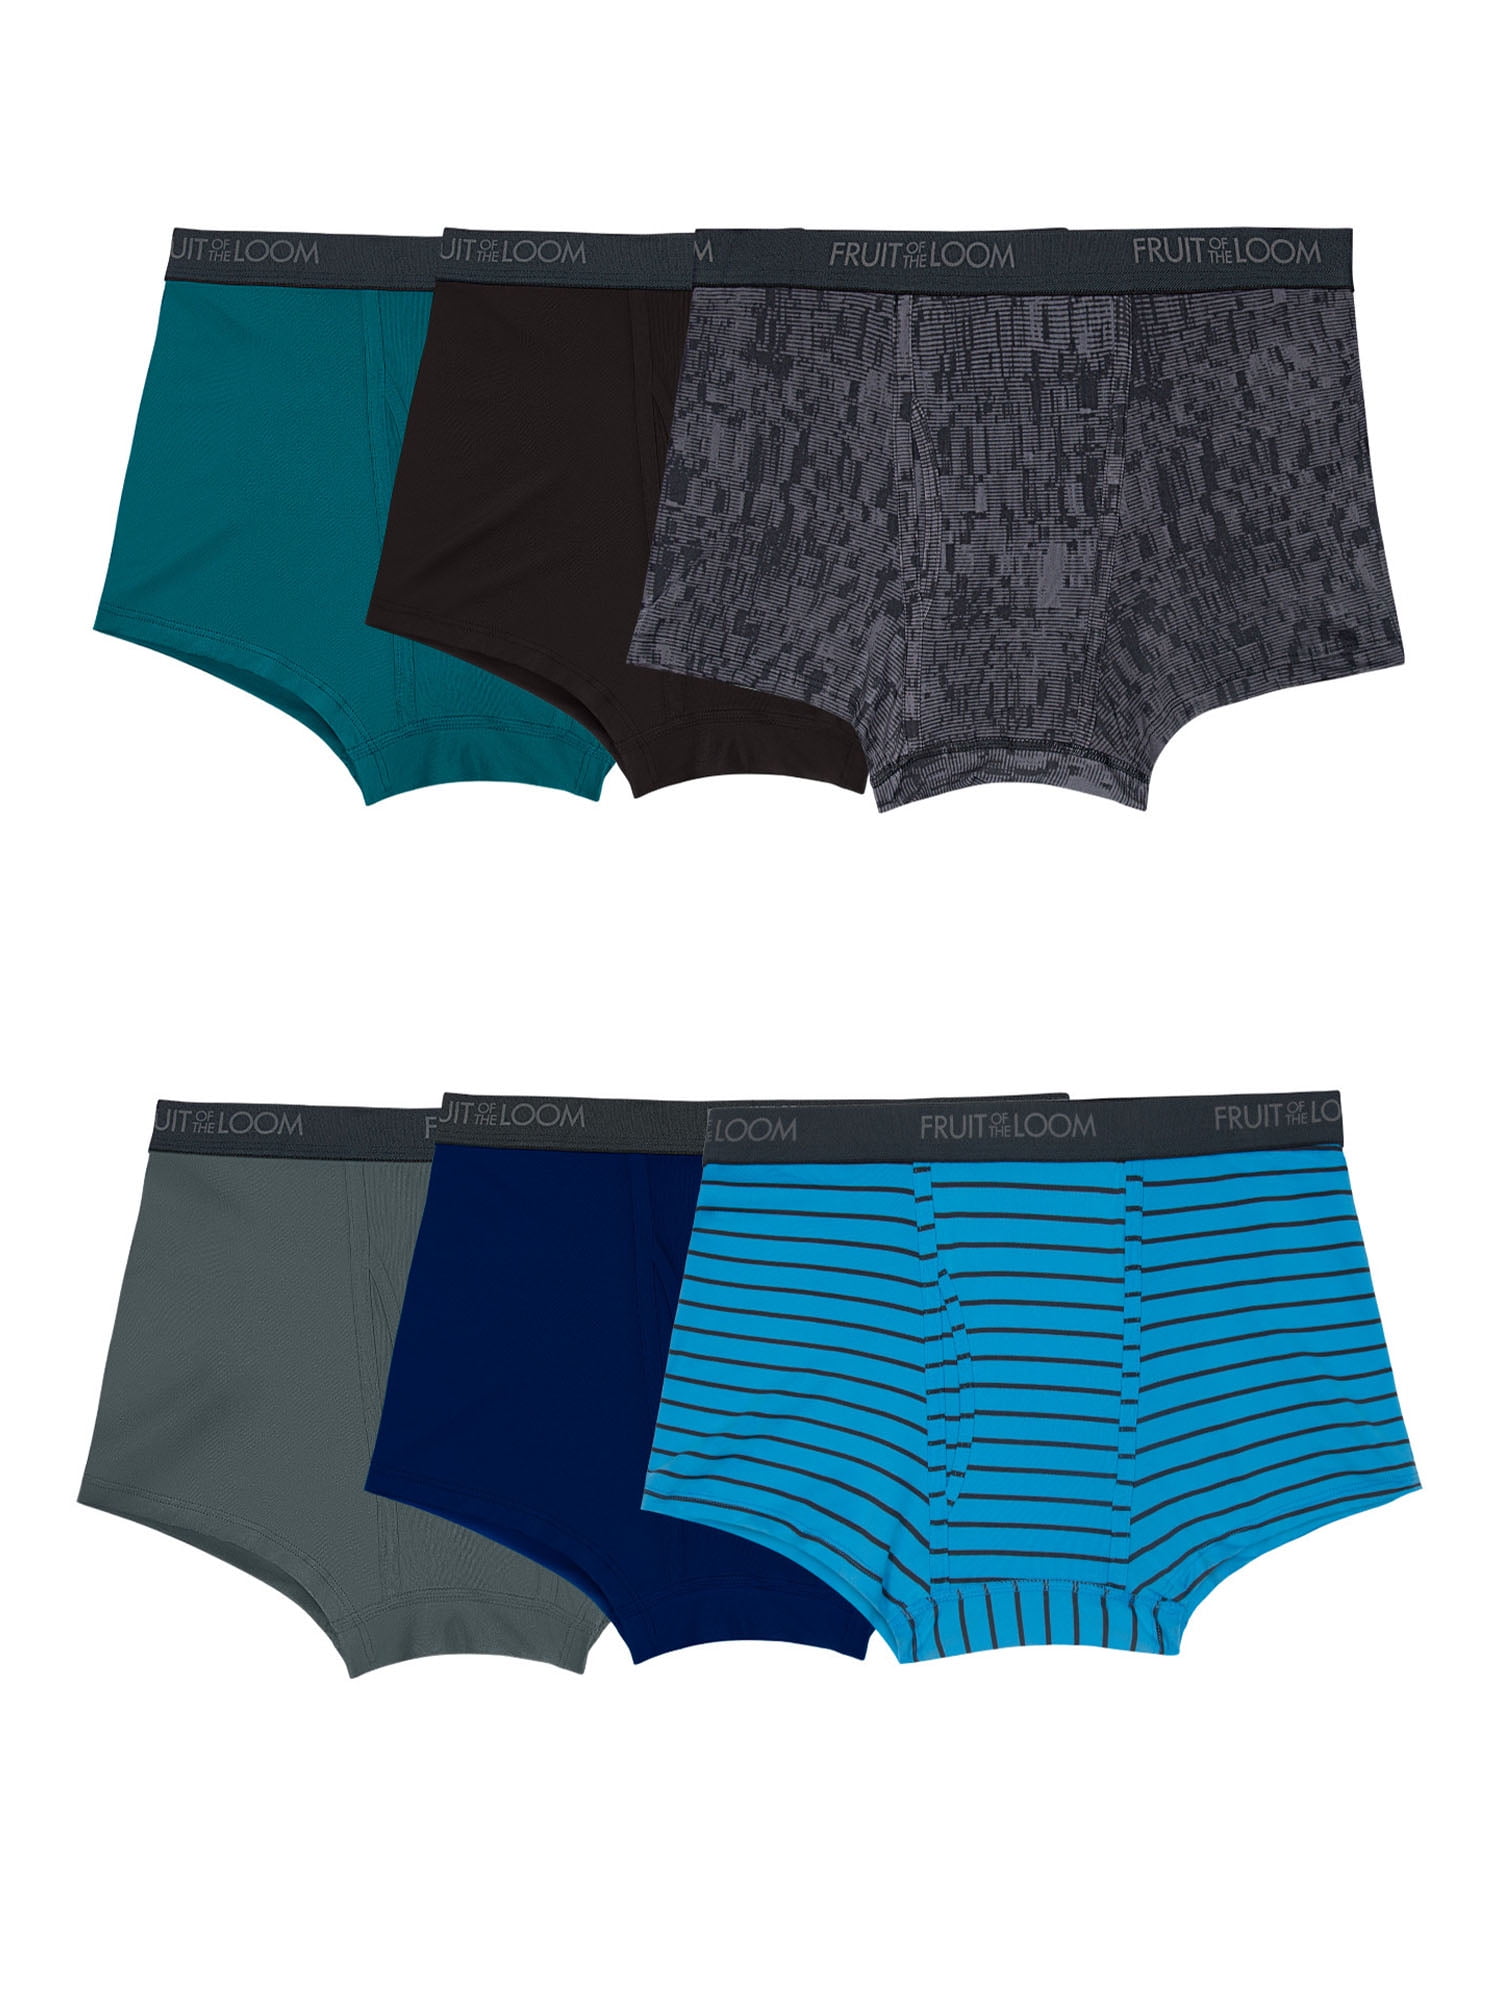 Calvin Klein Micro Stretch Low Rise Solid Trunks 3-Pack